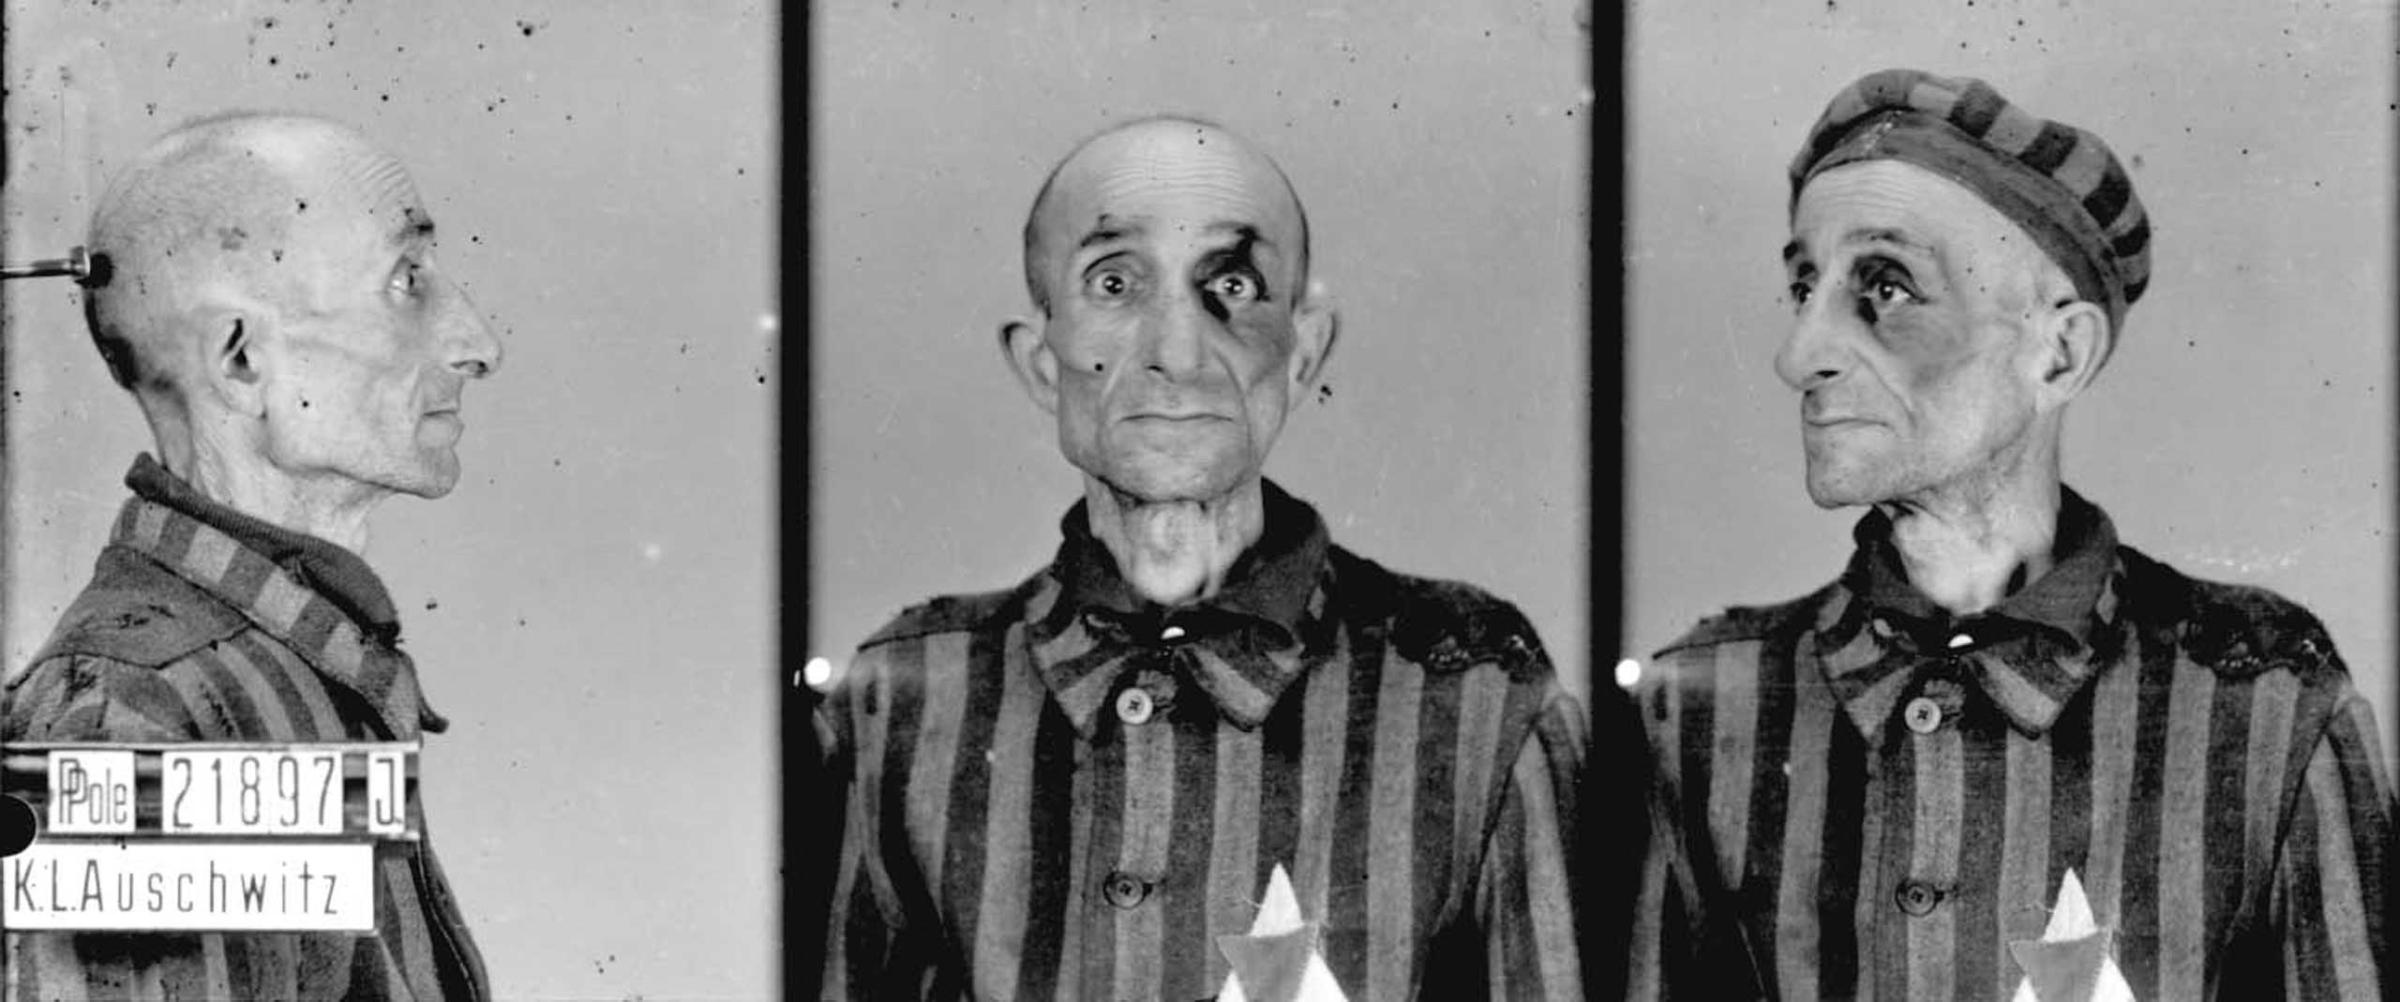 Prisoner no. 21897 at Auschwitz, Poland, c. 1940-45. These inmate ID photos were taken by the camp's Erkennungsdienst, the photographic identification unit. Most of the photos were taken by Wilhelm Brasse, an inmate of German-Polish decent with photographic training. Brasse has estimated that he took about 40,000 to 50,000 "identity pictures" before being forcibly moved to another concentration camp in Austria.